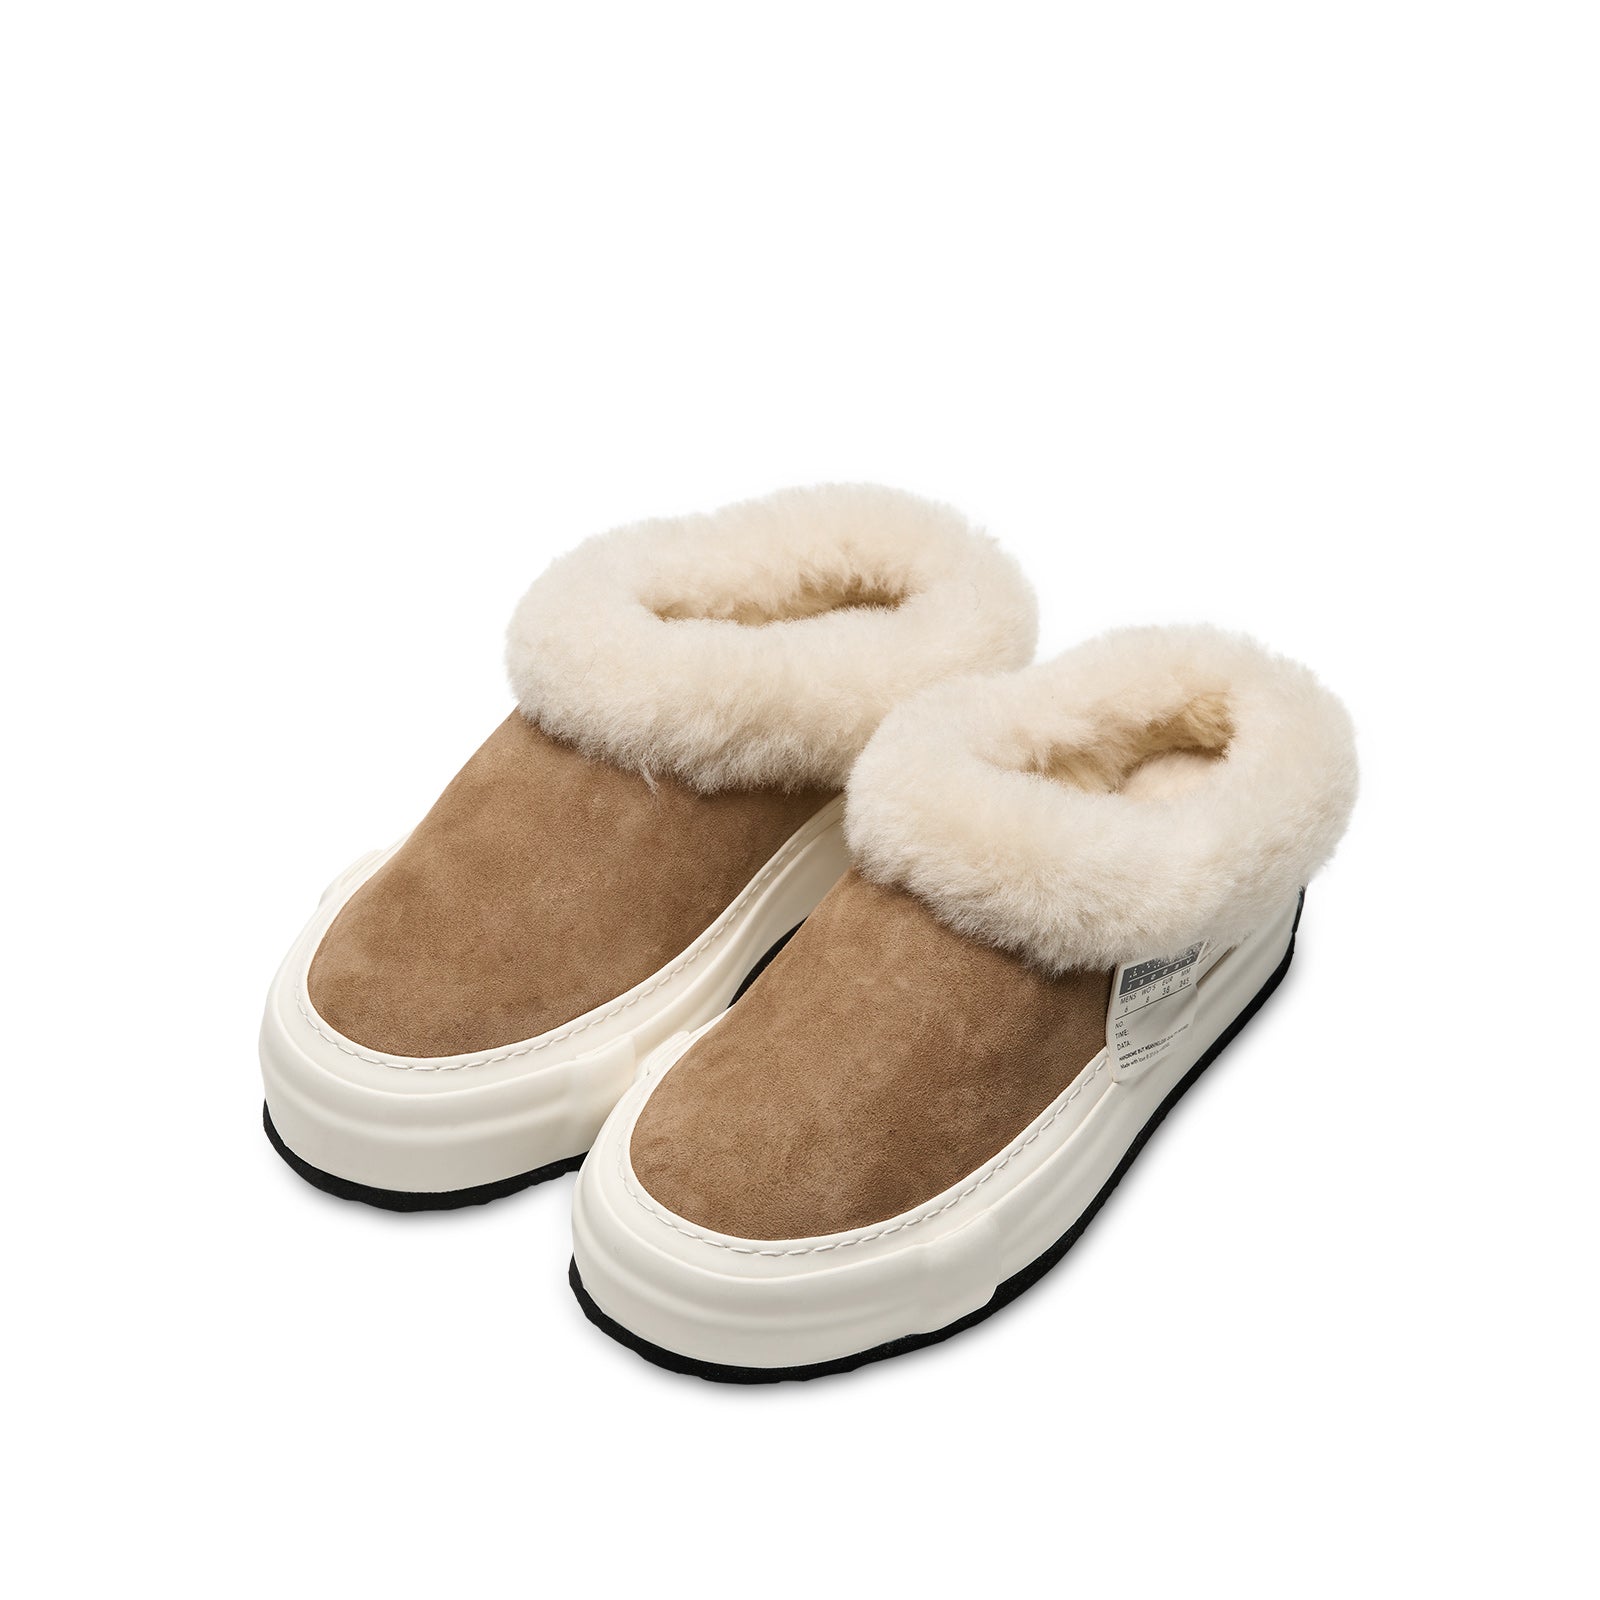 xVESSEL Slip On Warmers - Ranch Suede